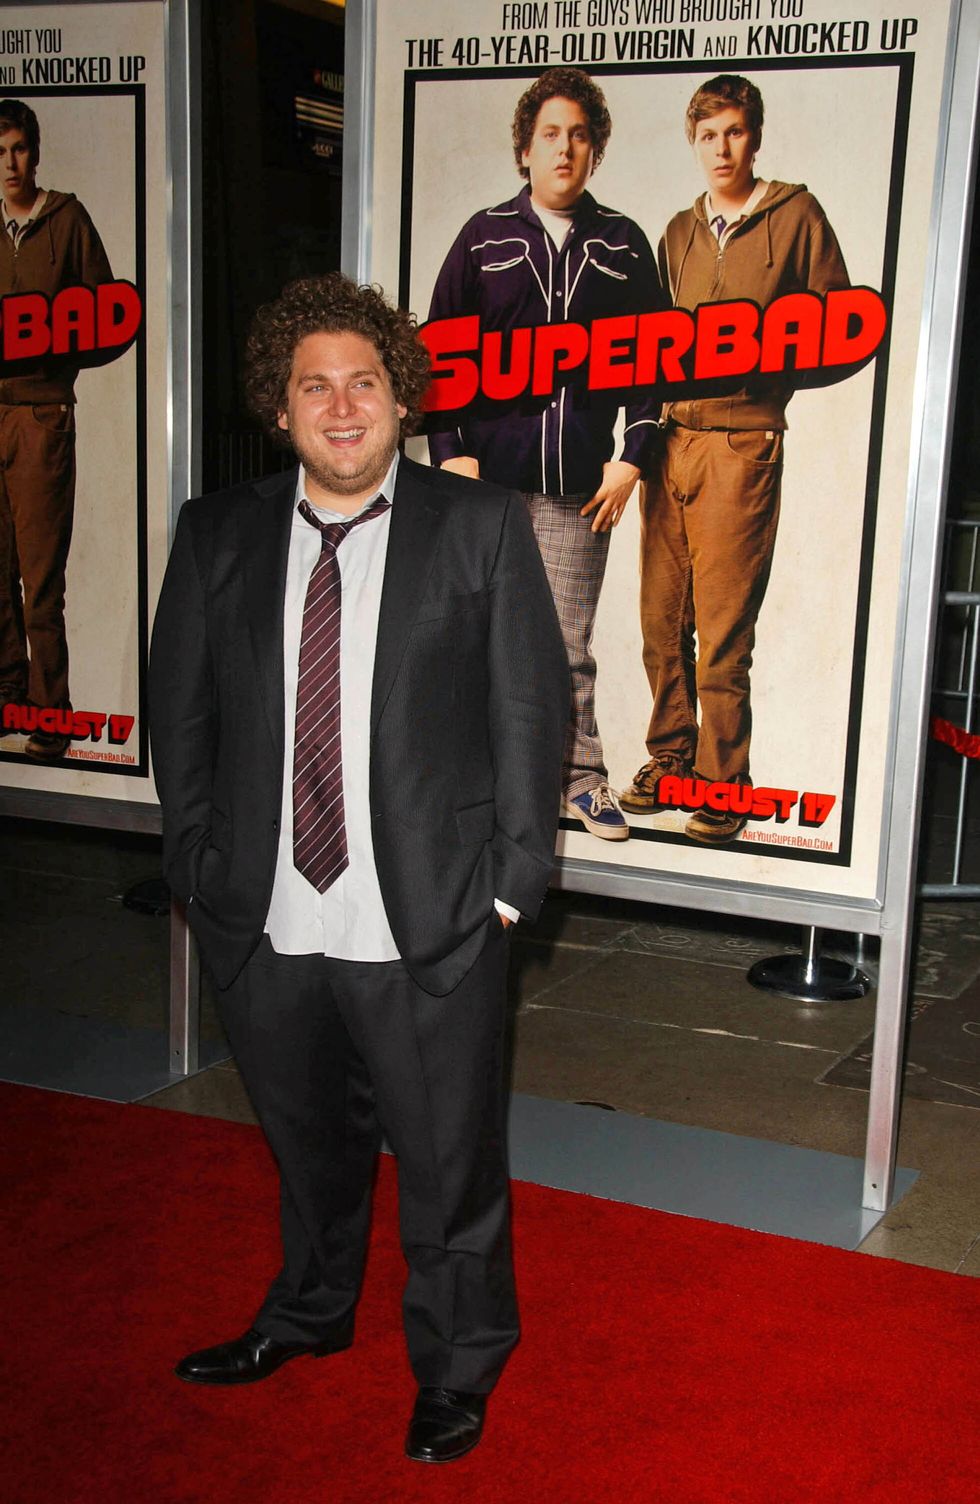 Jonah Hill at the premiere of Superbad at Grauman's Chinese Theatre on August 13, 2007 in Hollywood, California. 